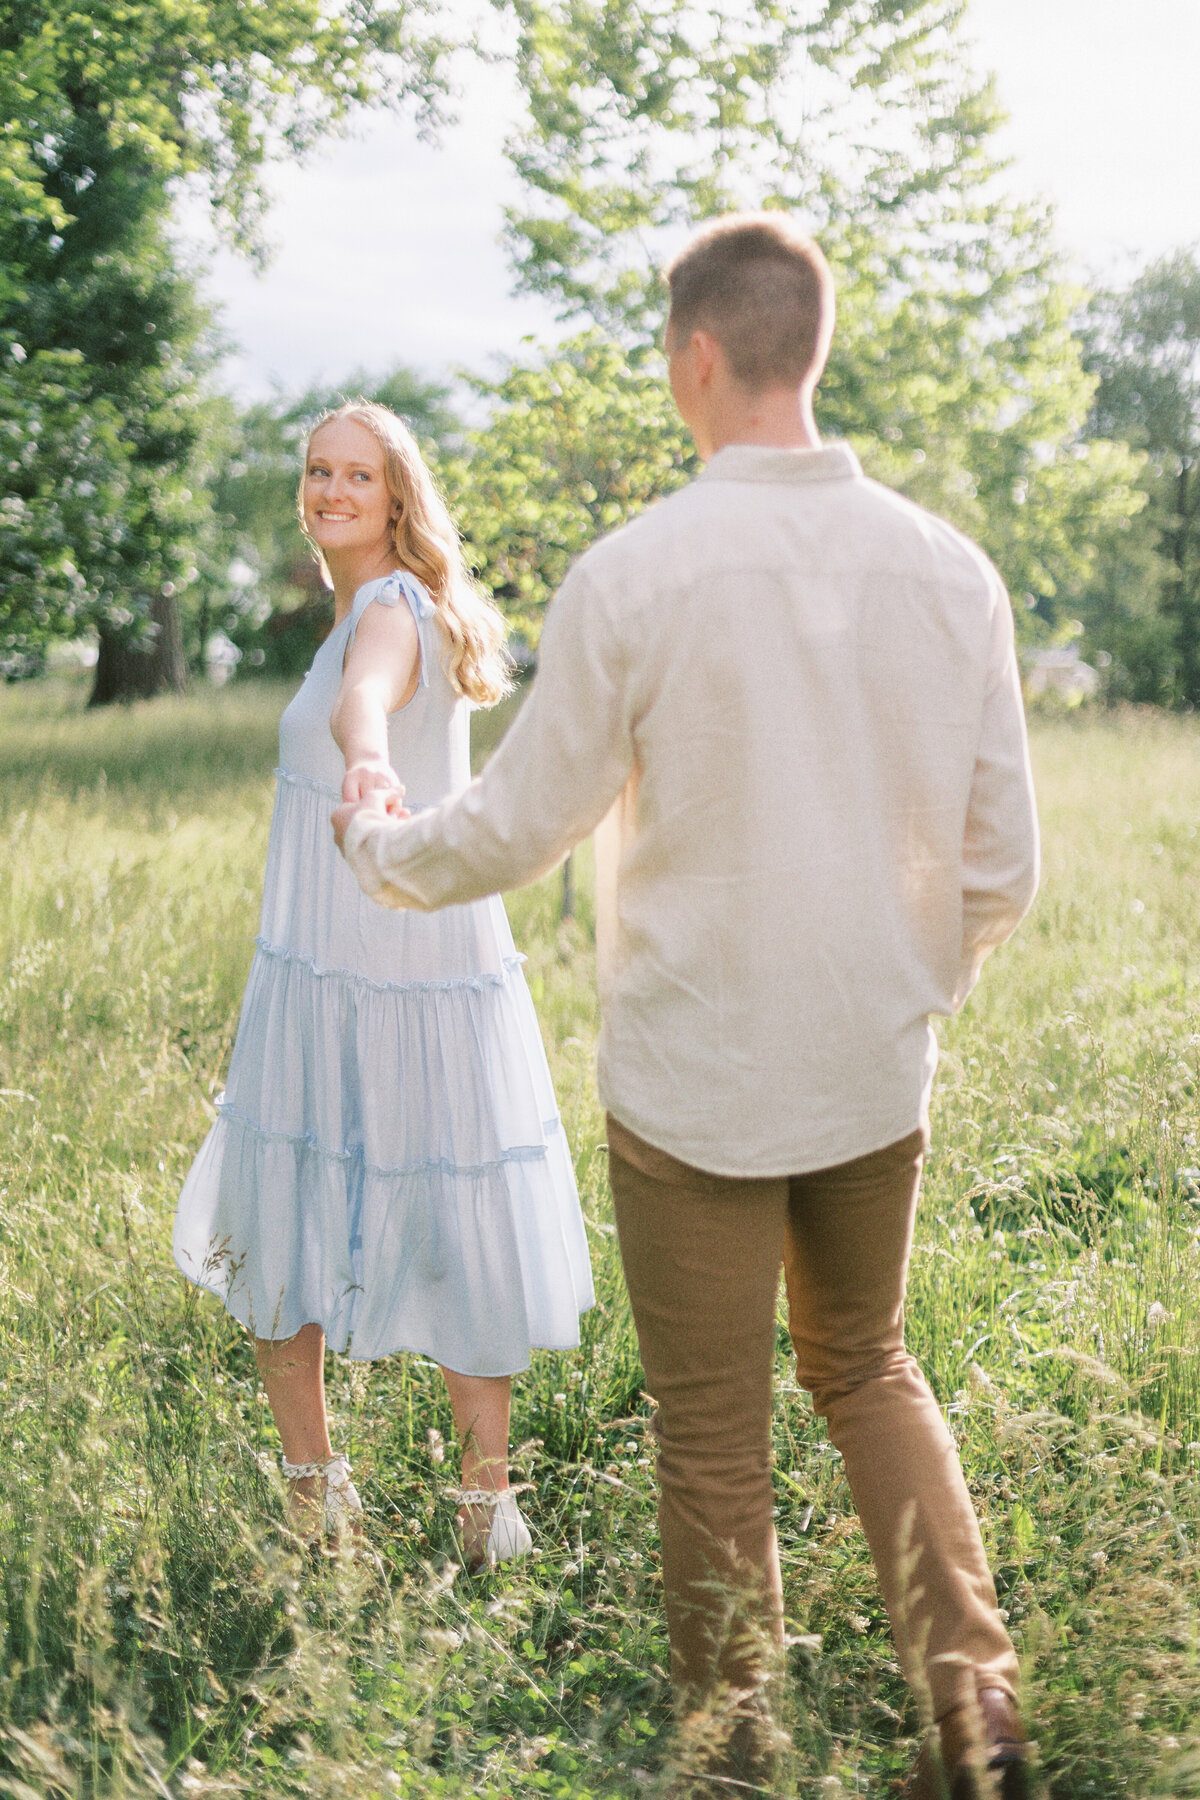 amber-rhea-photography-midwest-wedding-photographer-stl-engagement210A4925